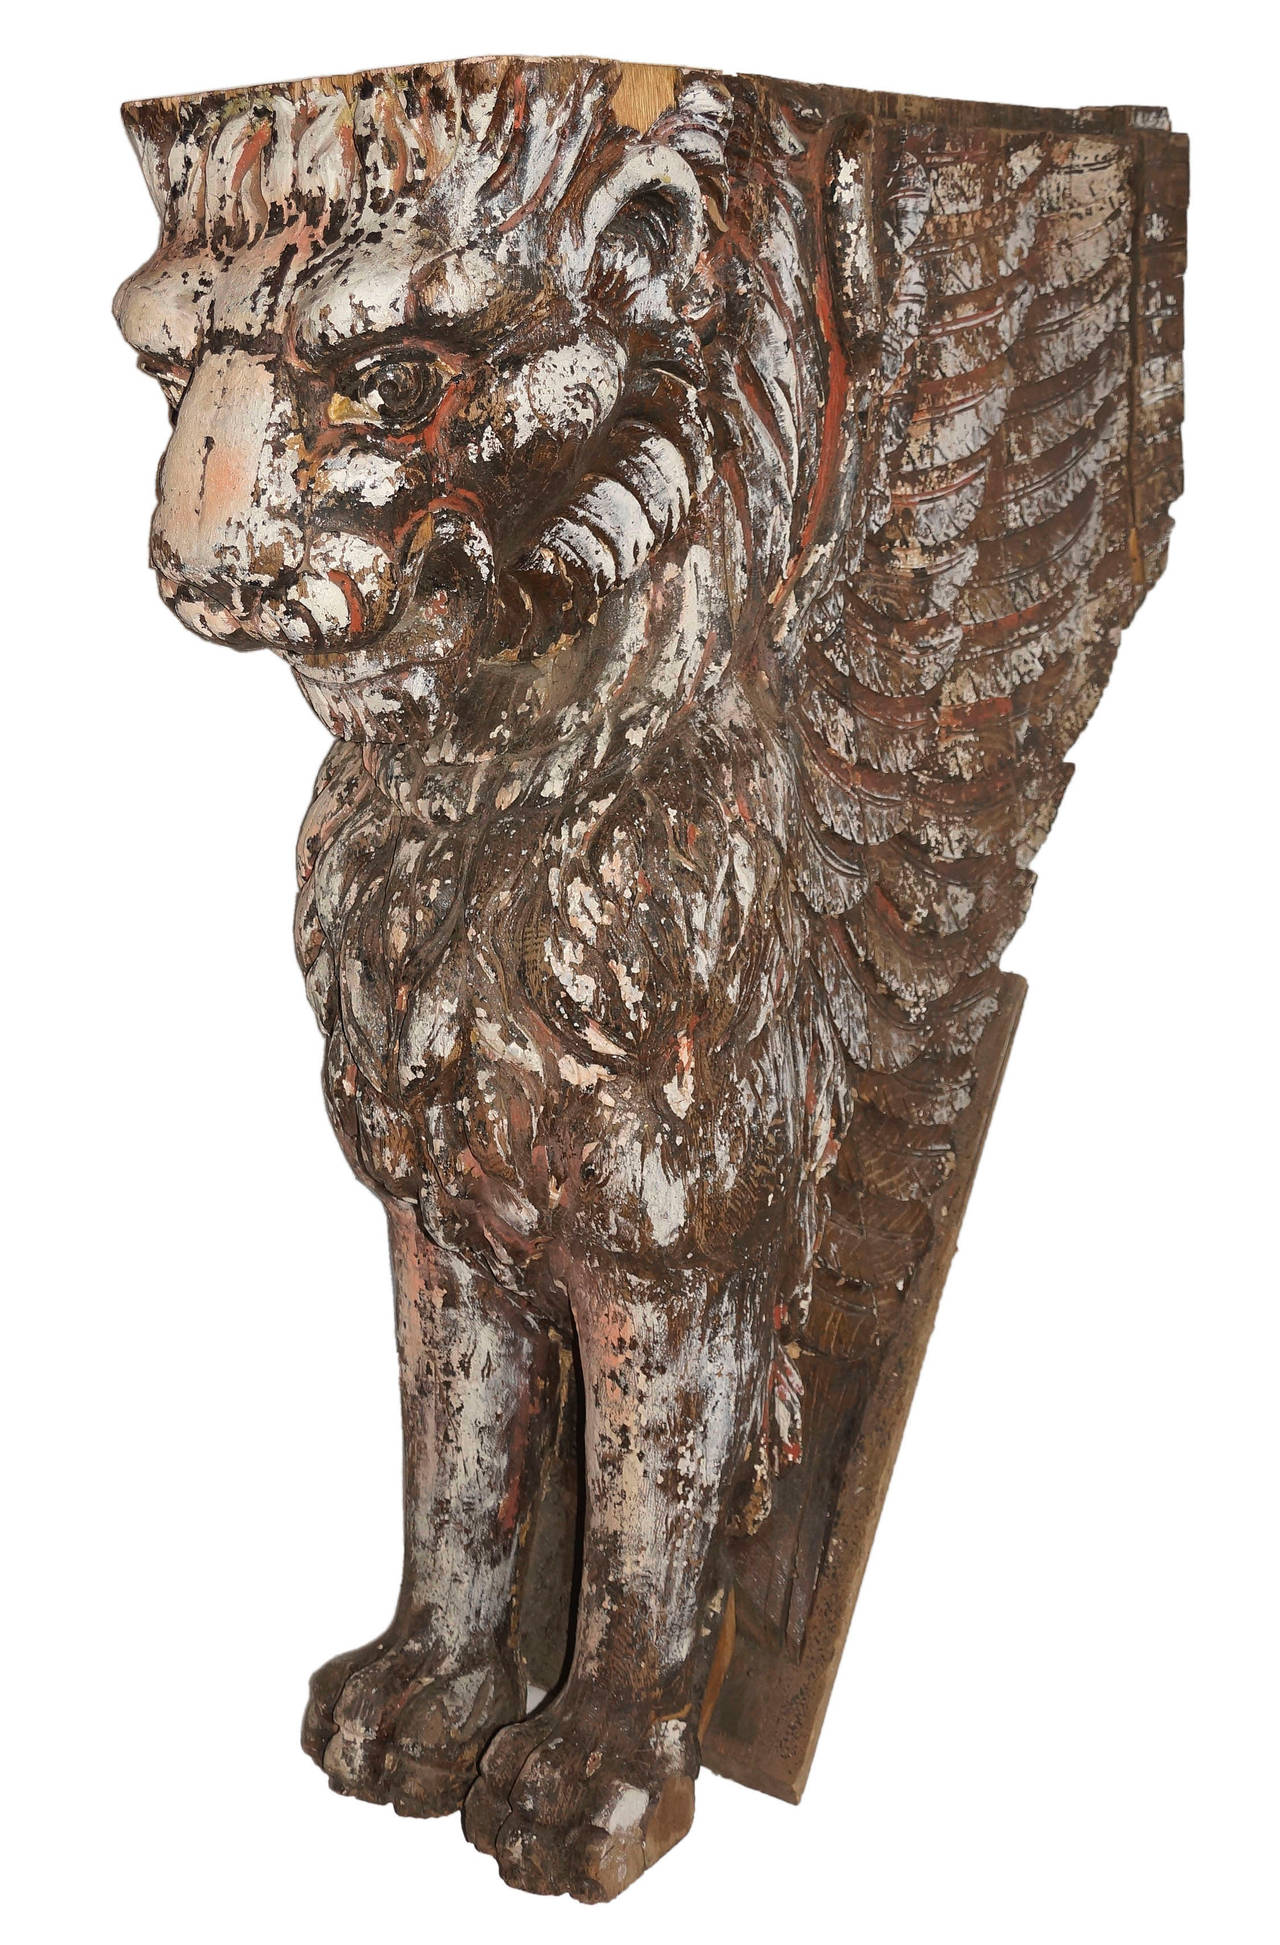 Circa 1895 carved wood winged lion ornament of impressive scale. Exceptional craftsmanship is shown in the detailed feathers of the wings and the rendering of the lion's face and mane.  Provenance: Originally formed part of the newel post of the